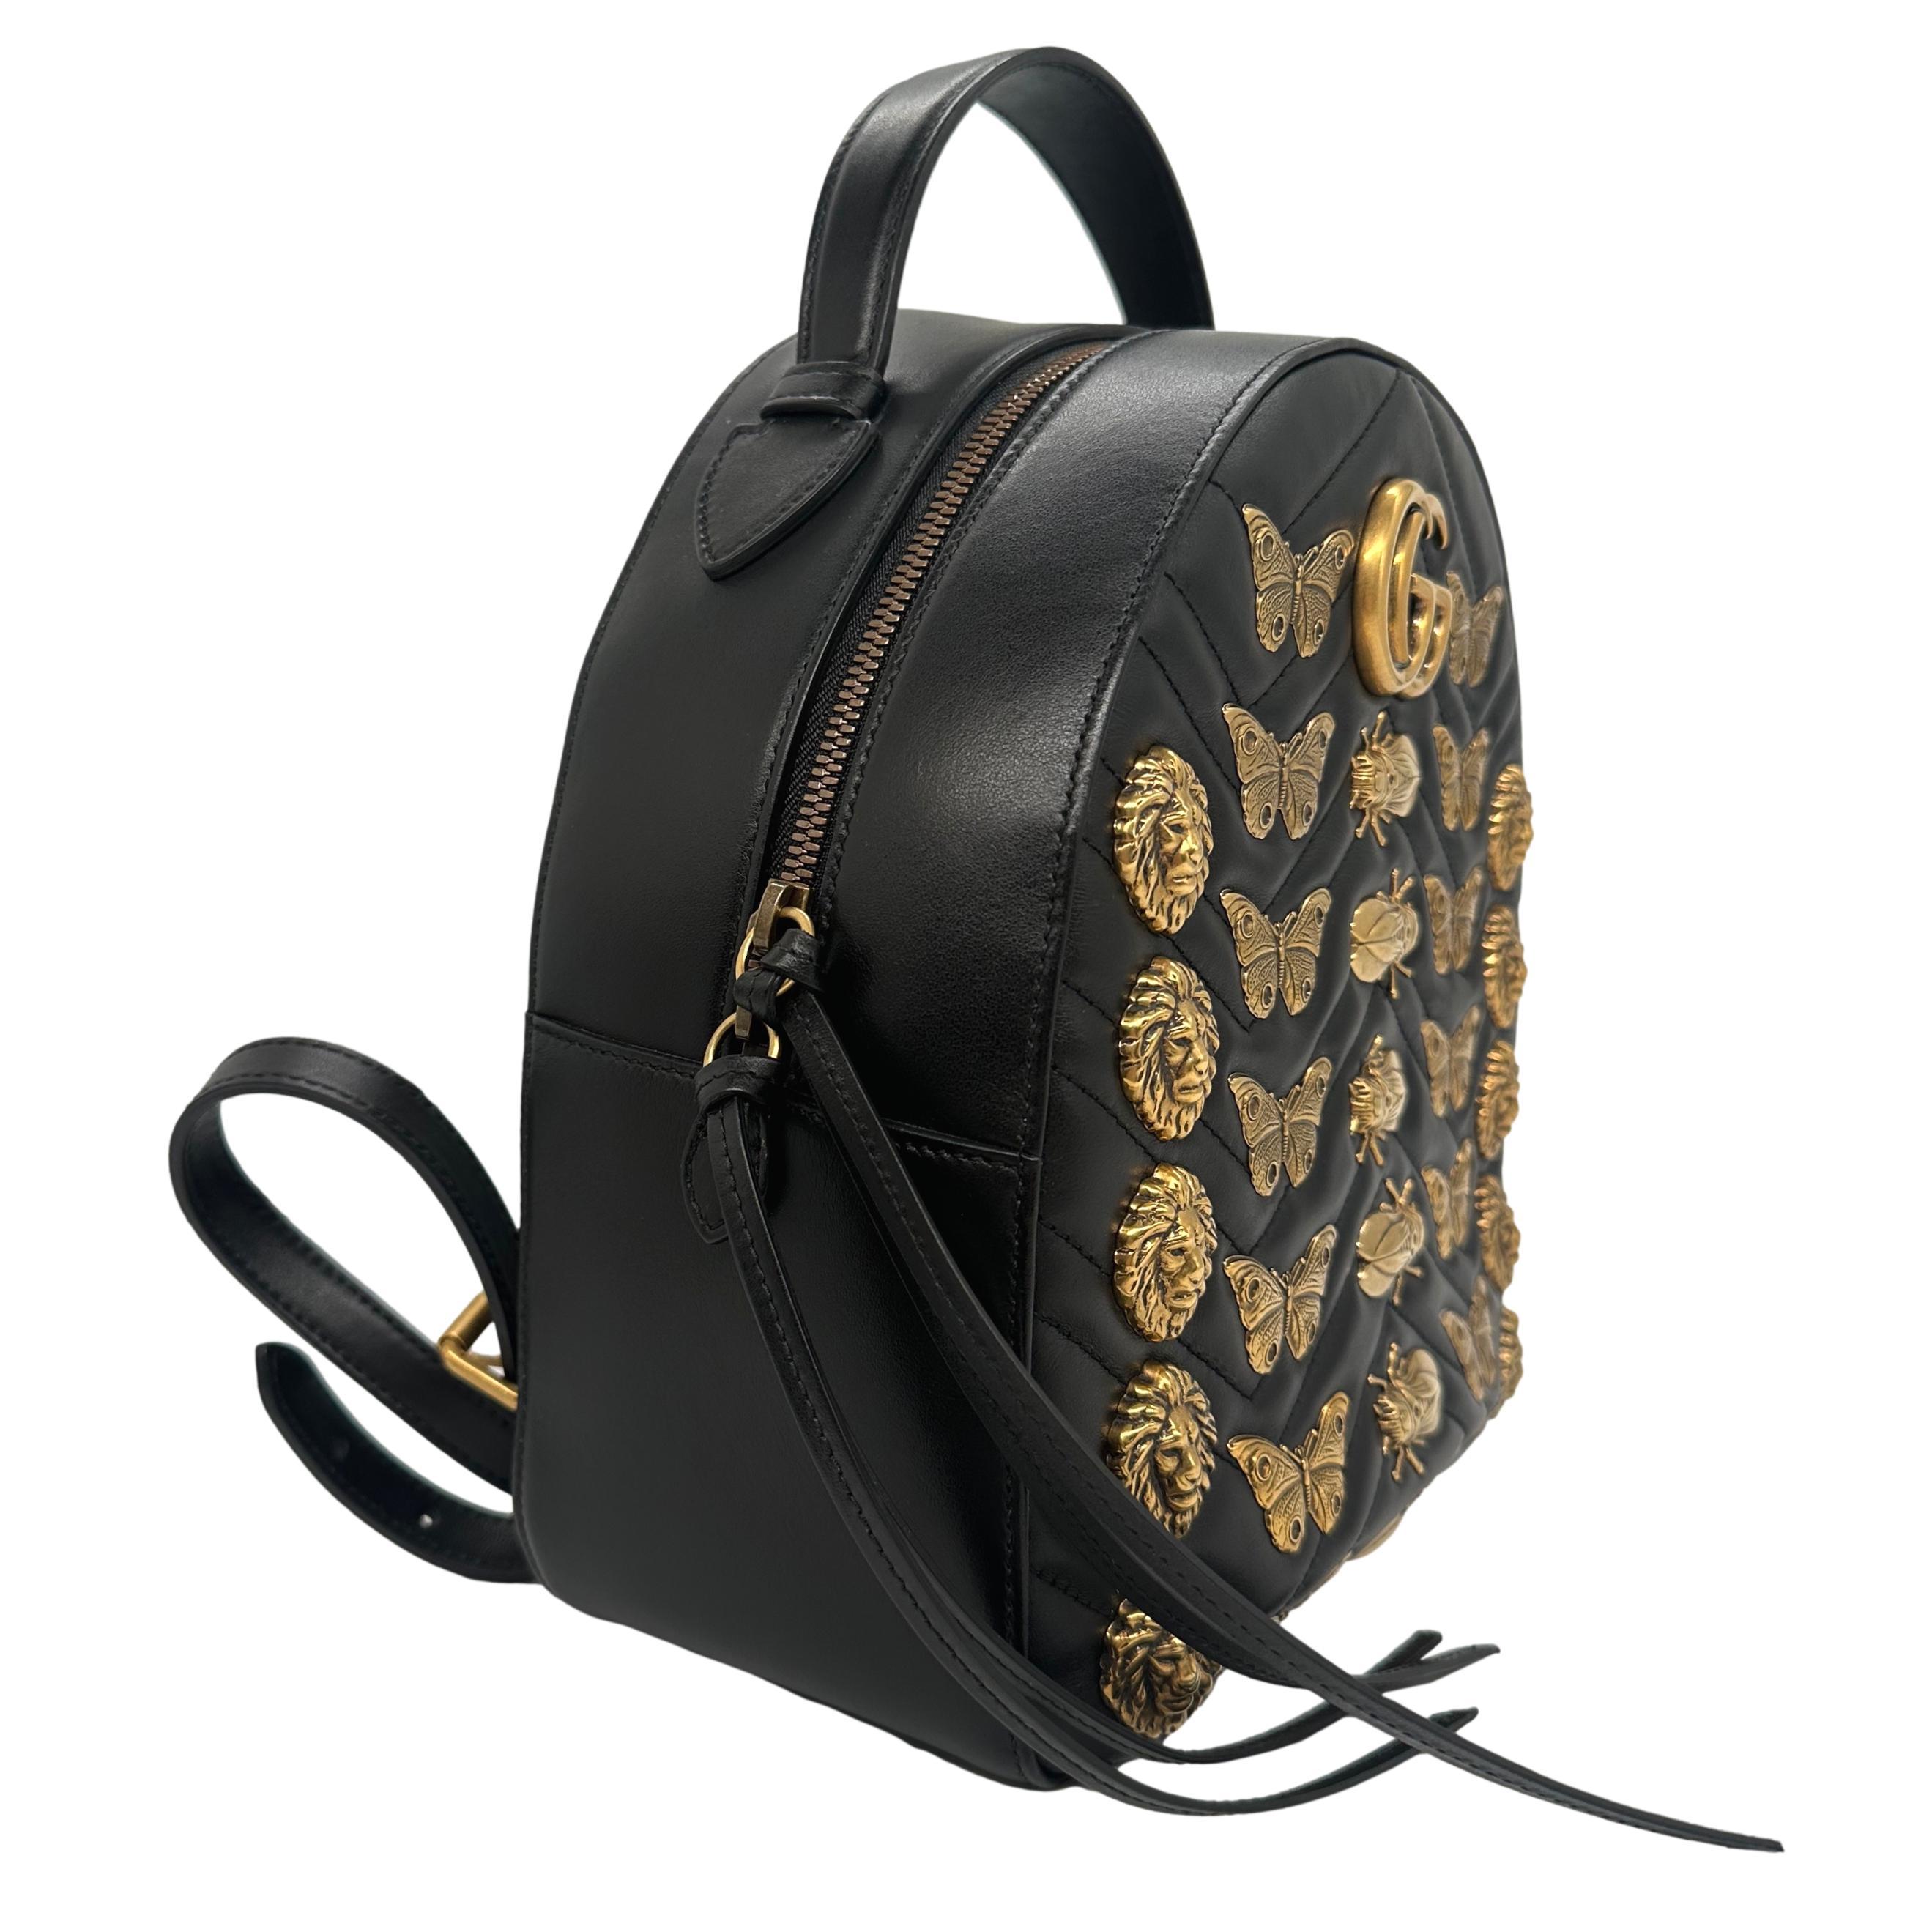 Gucci Black Calfskin Matelassé Leather Animal Studded GG Marmont Backpack, 2017. The classic Gucci matelassé leather takes a new shape in this special limited edition 